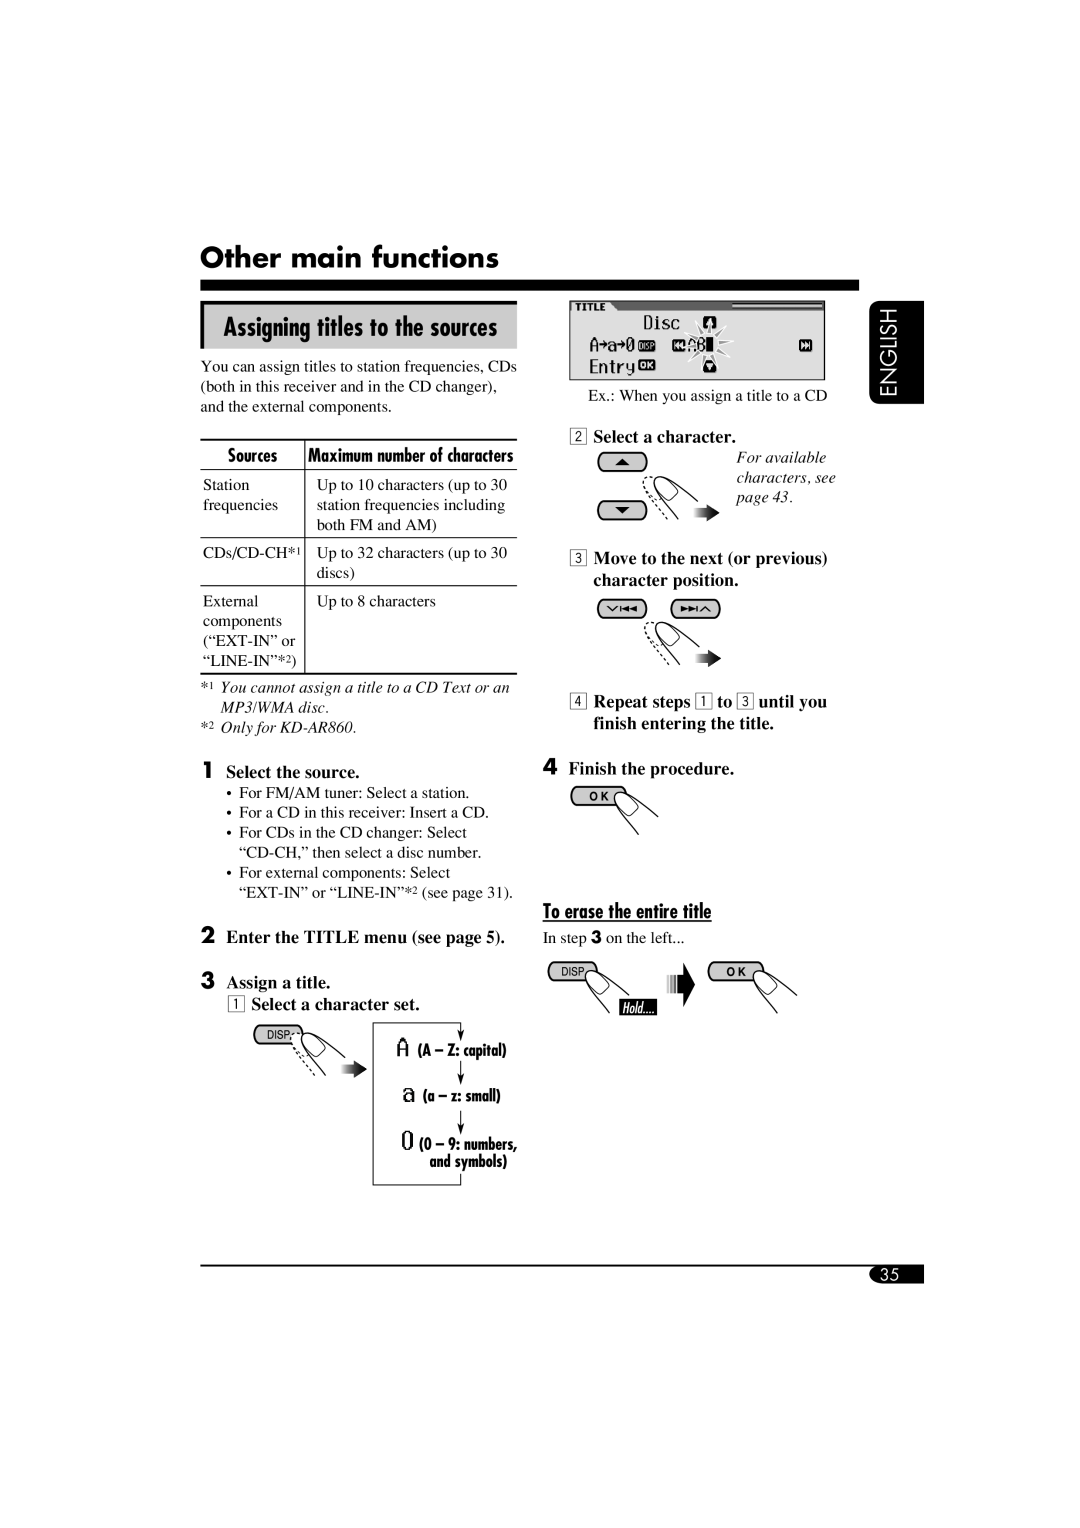 JVC KD-LH810 Other main functions, Assigning titles to the sources, To erase the entire title, English, 1Select the source 